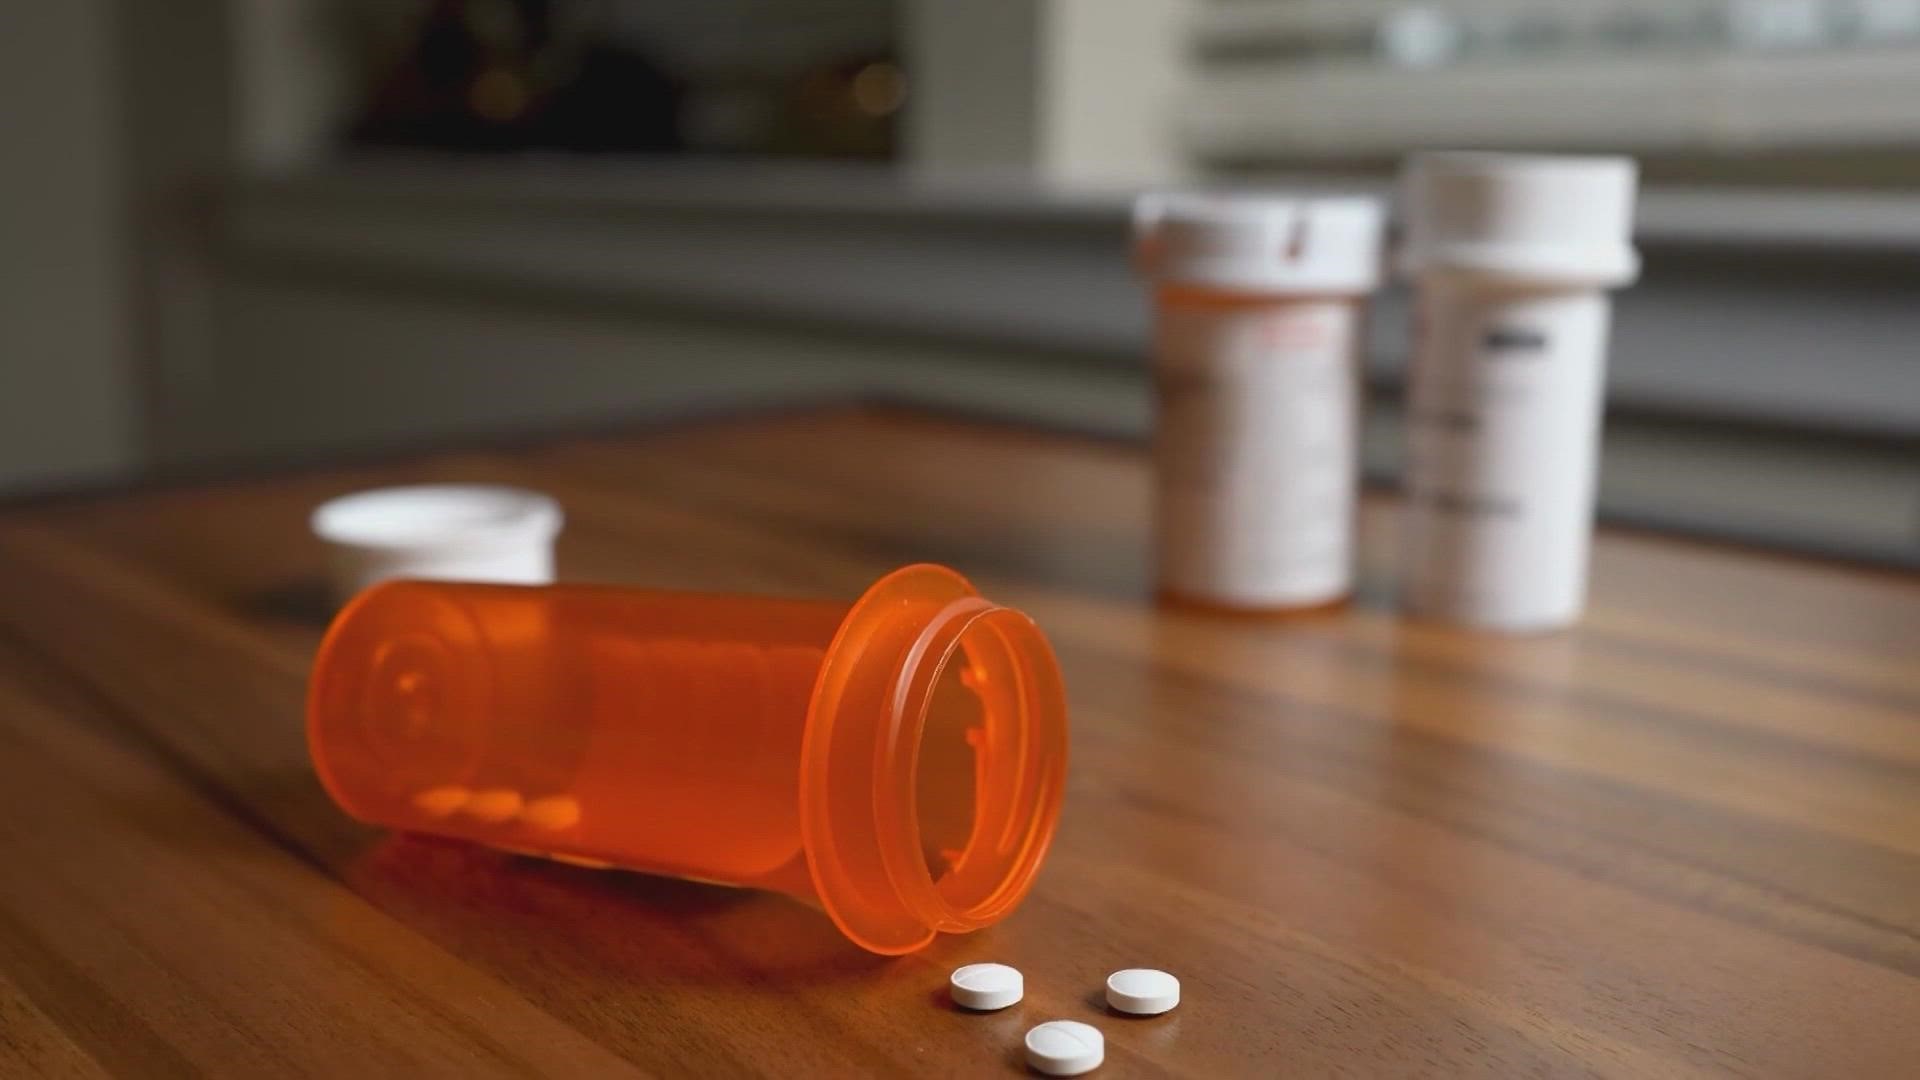 The opioid epidemic is a huge problem here in the U.S. and it's getting worse every day.